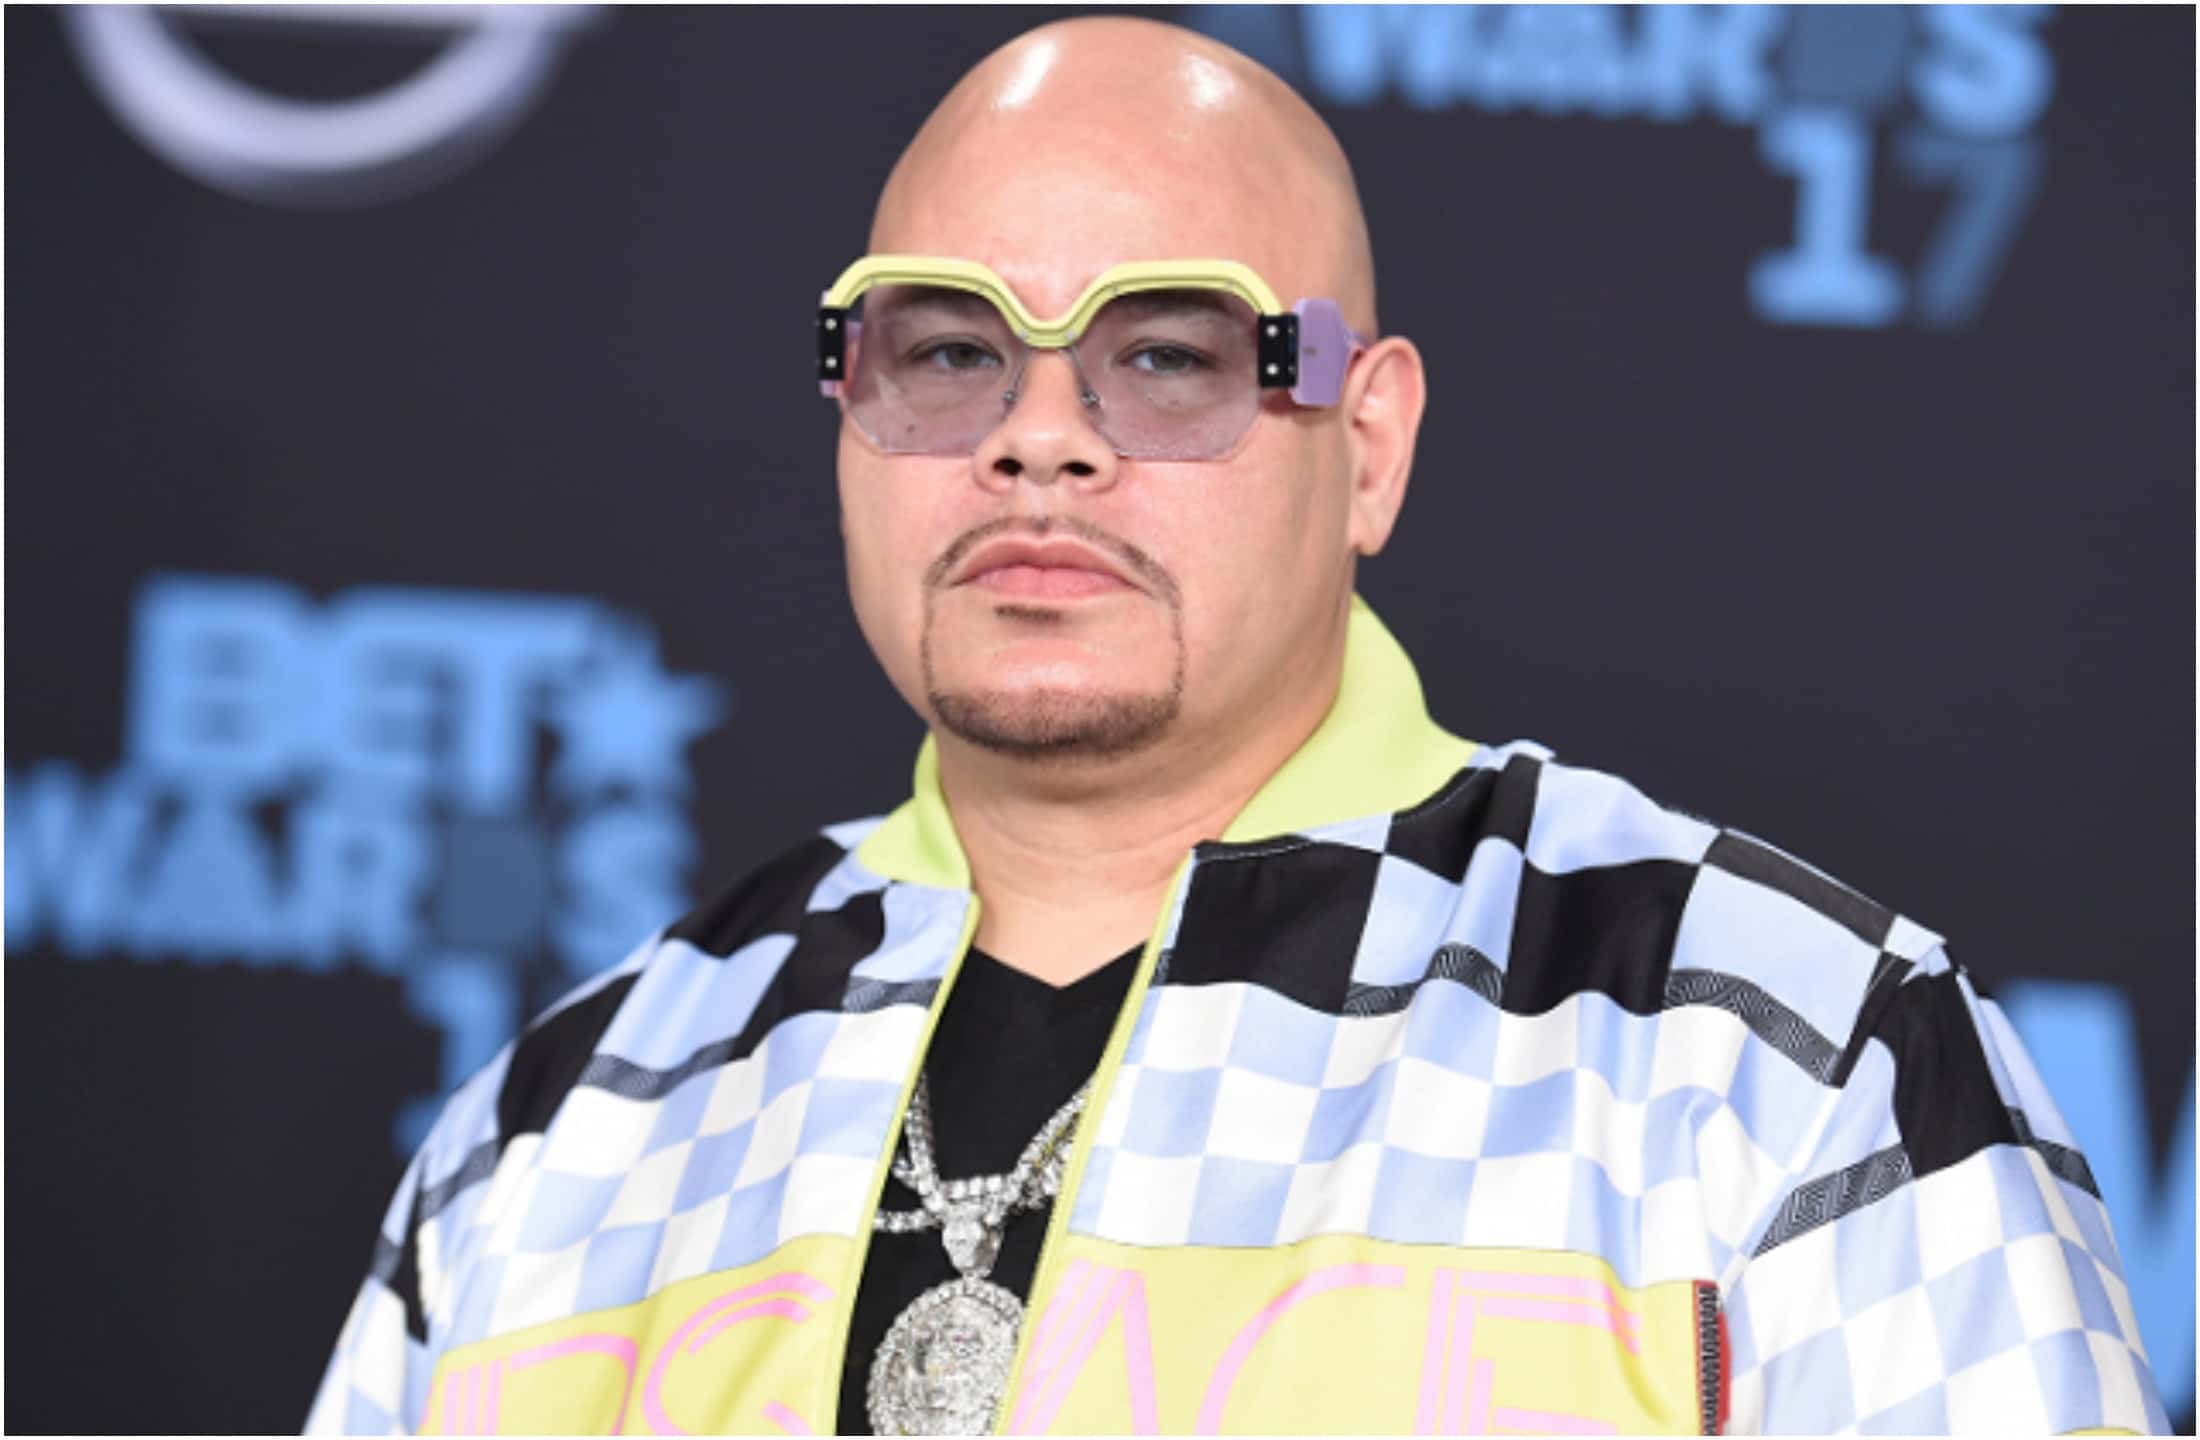 At Concerts, Fat Joe Blasts Phone-Wielding Fans For Not Being "In The Moment"